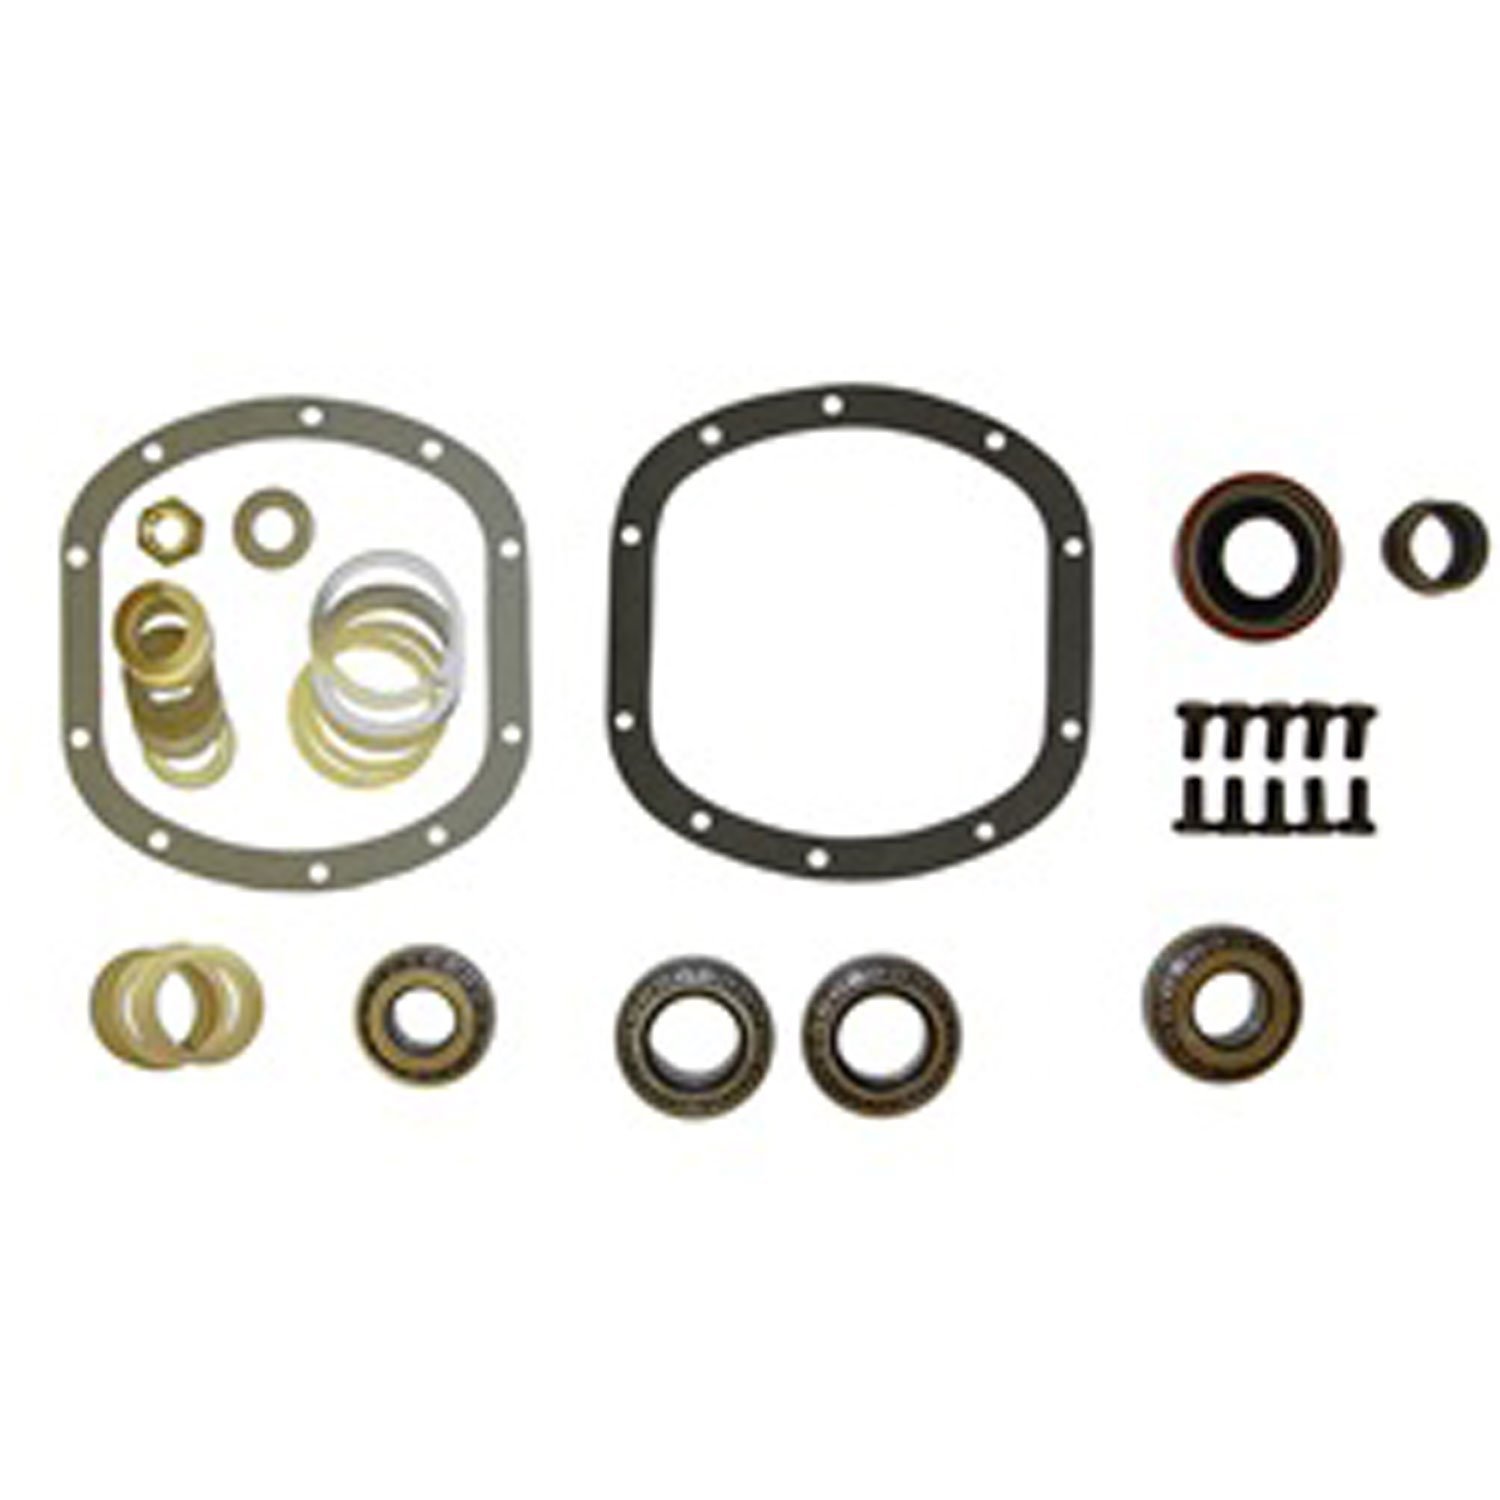 This differential rebuild kit from Omix-ADA fits 92-01 Jeep Cherokee XJ and 97-12 Jeep Wrangler with Dana 30 front axle.